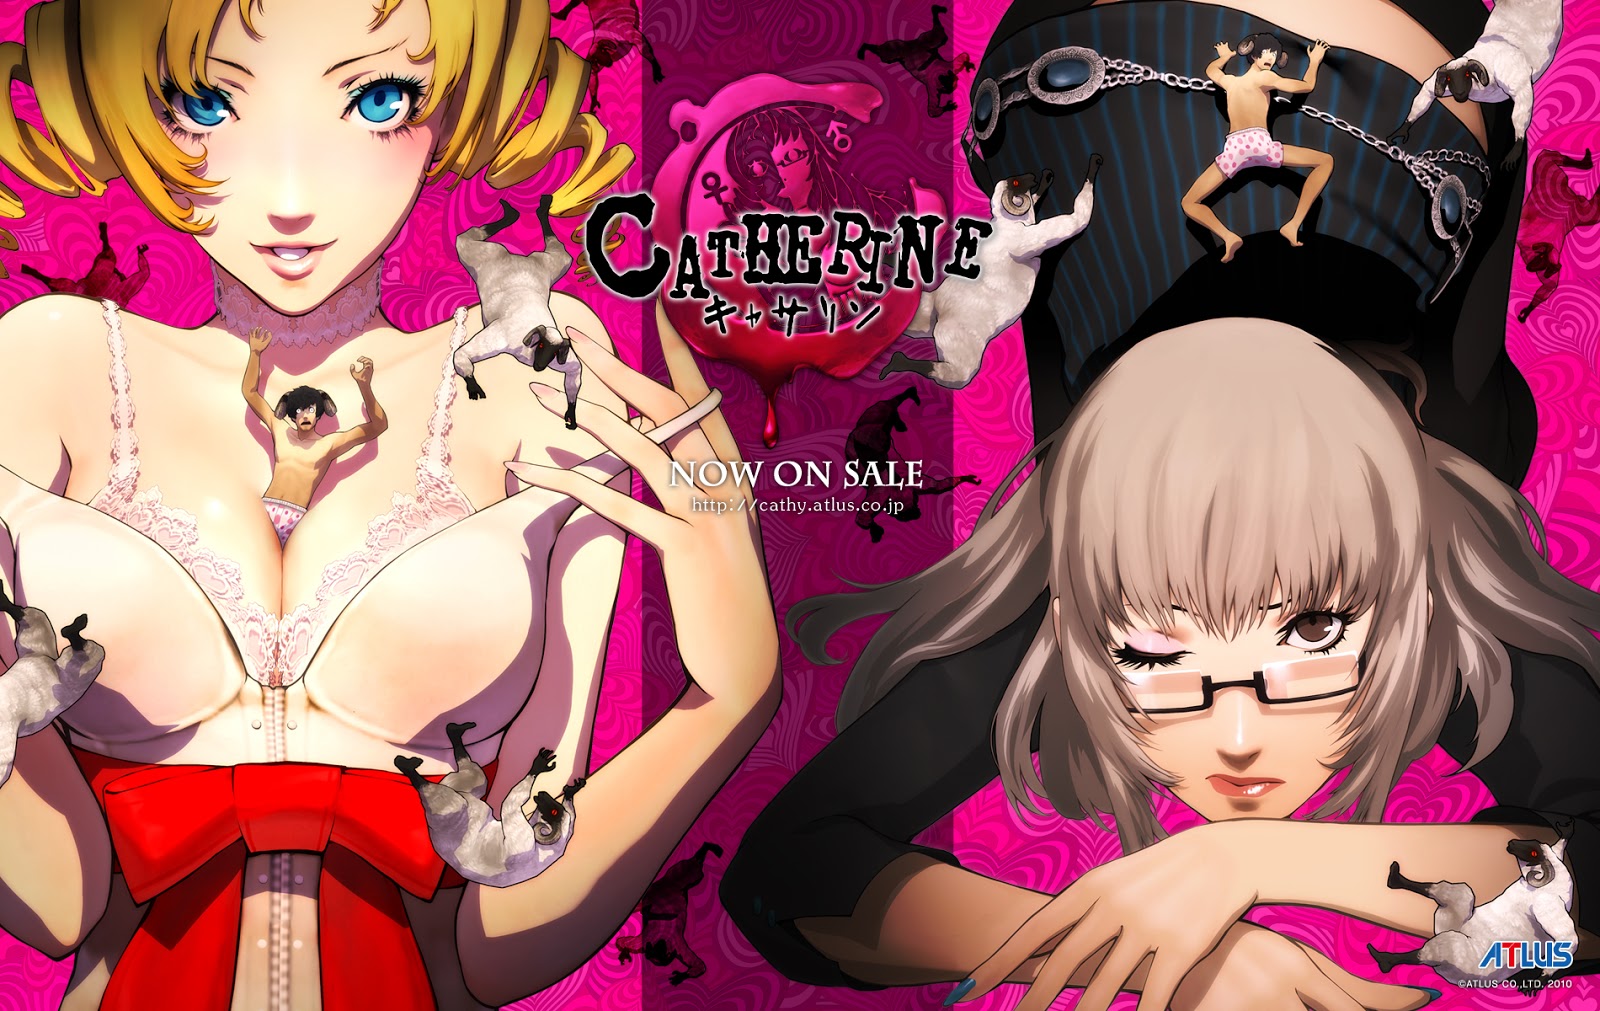 [Rumor] Atlus would be working on a Catherine remaster